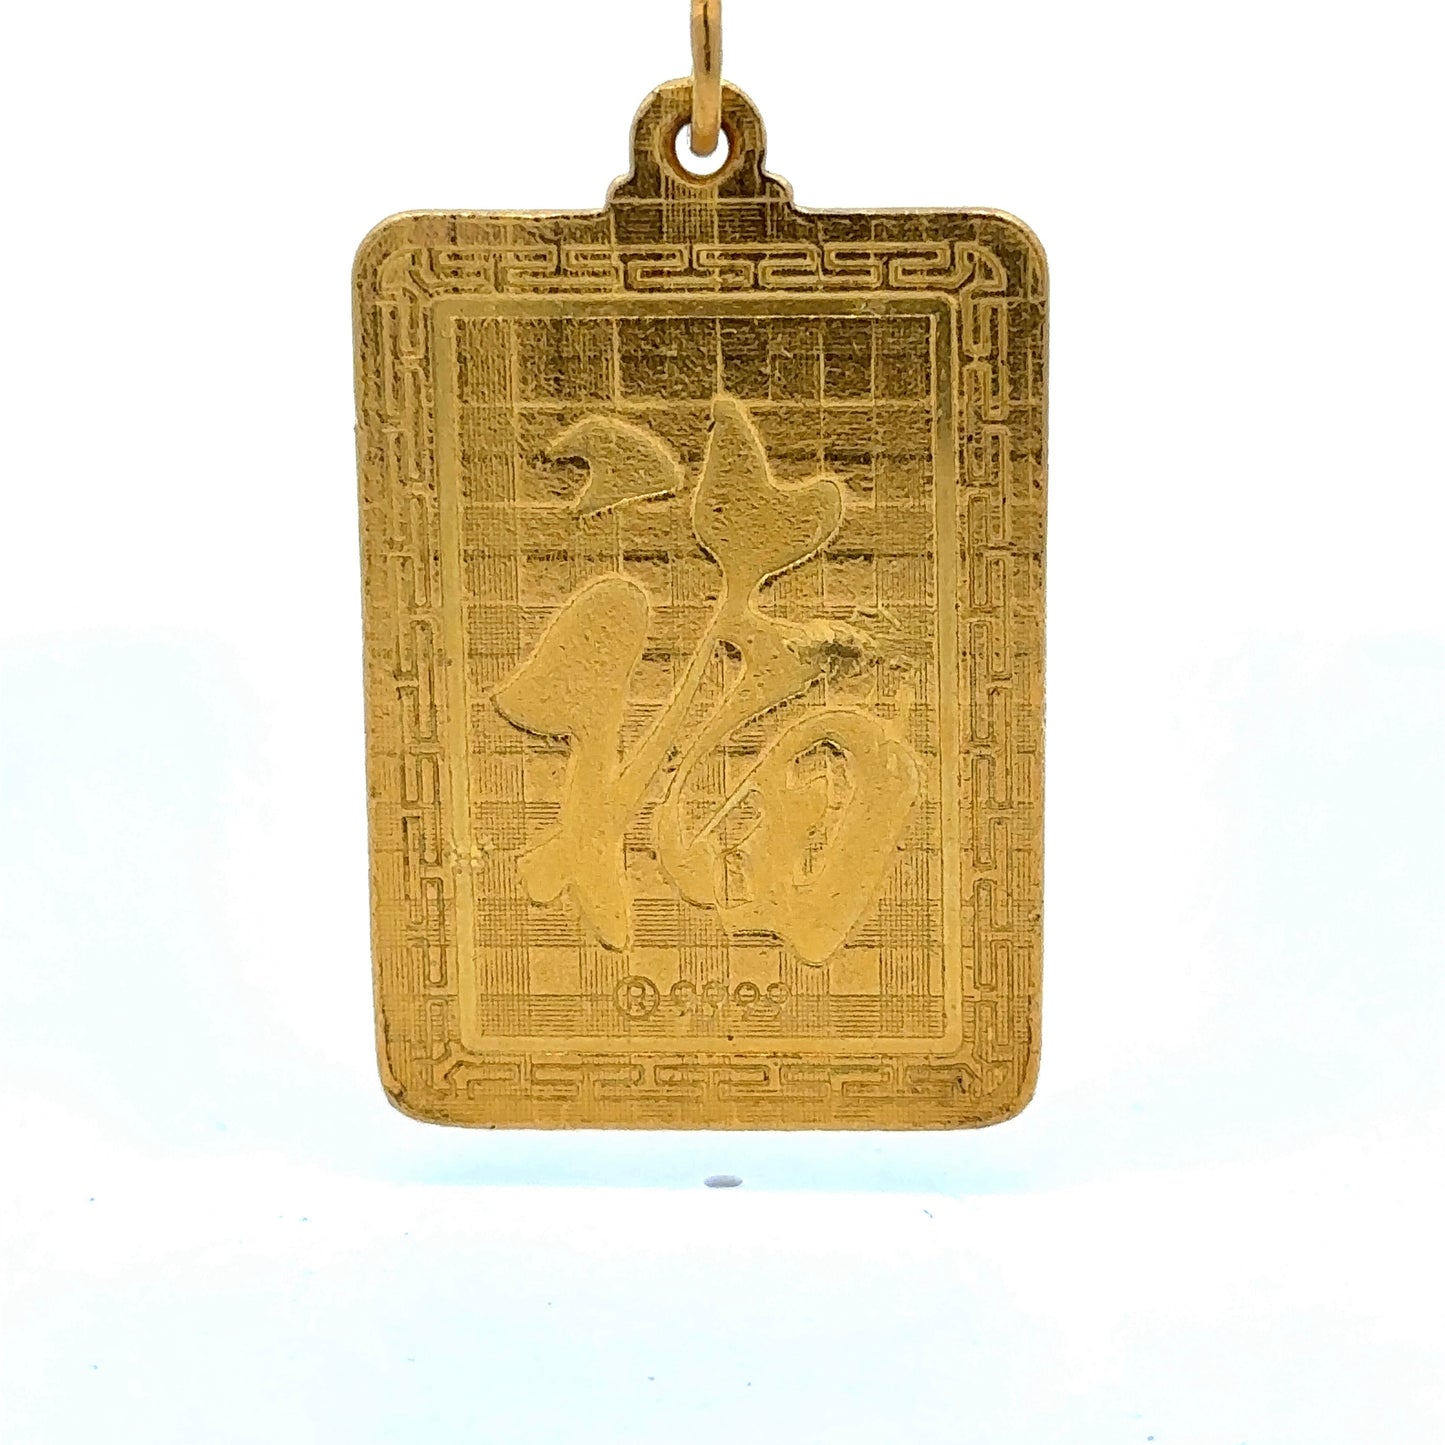 close up of back of the pendant with a chinese symbol, scratches, and a small dent on the gold